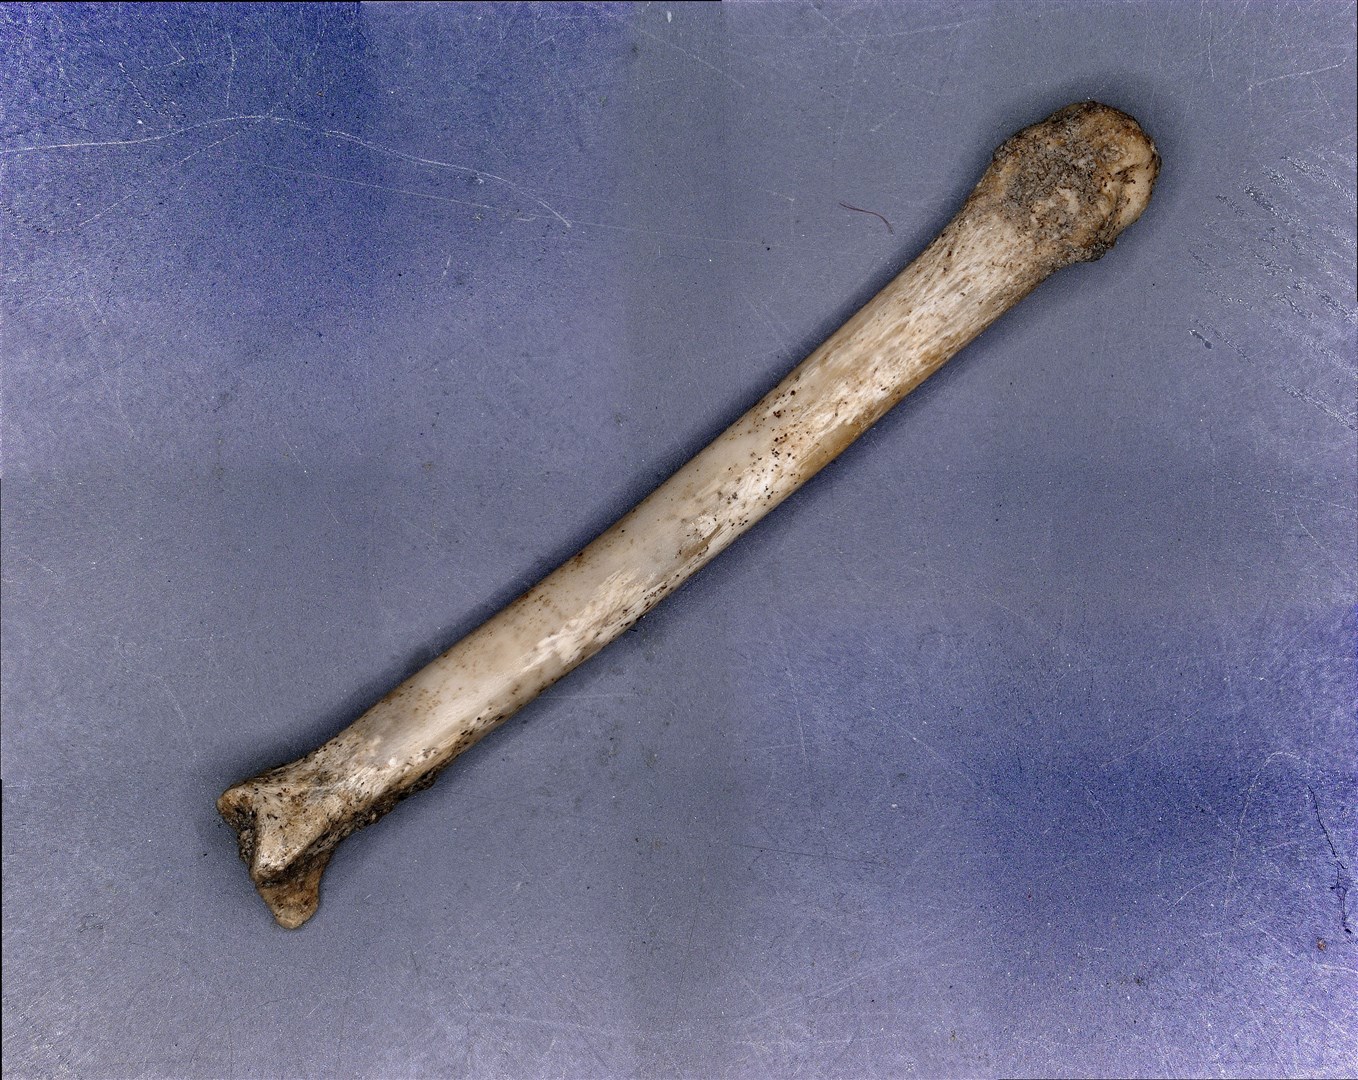 A squirrel bone found at one of the two archaeological sites in Winchester (Alette Blom/University of Basel)